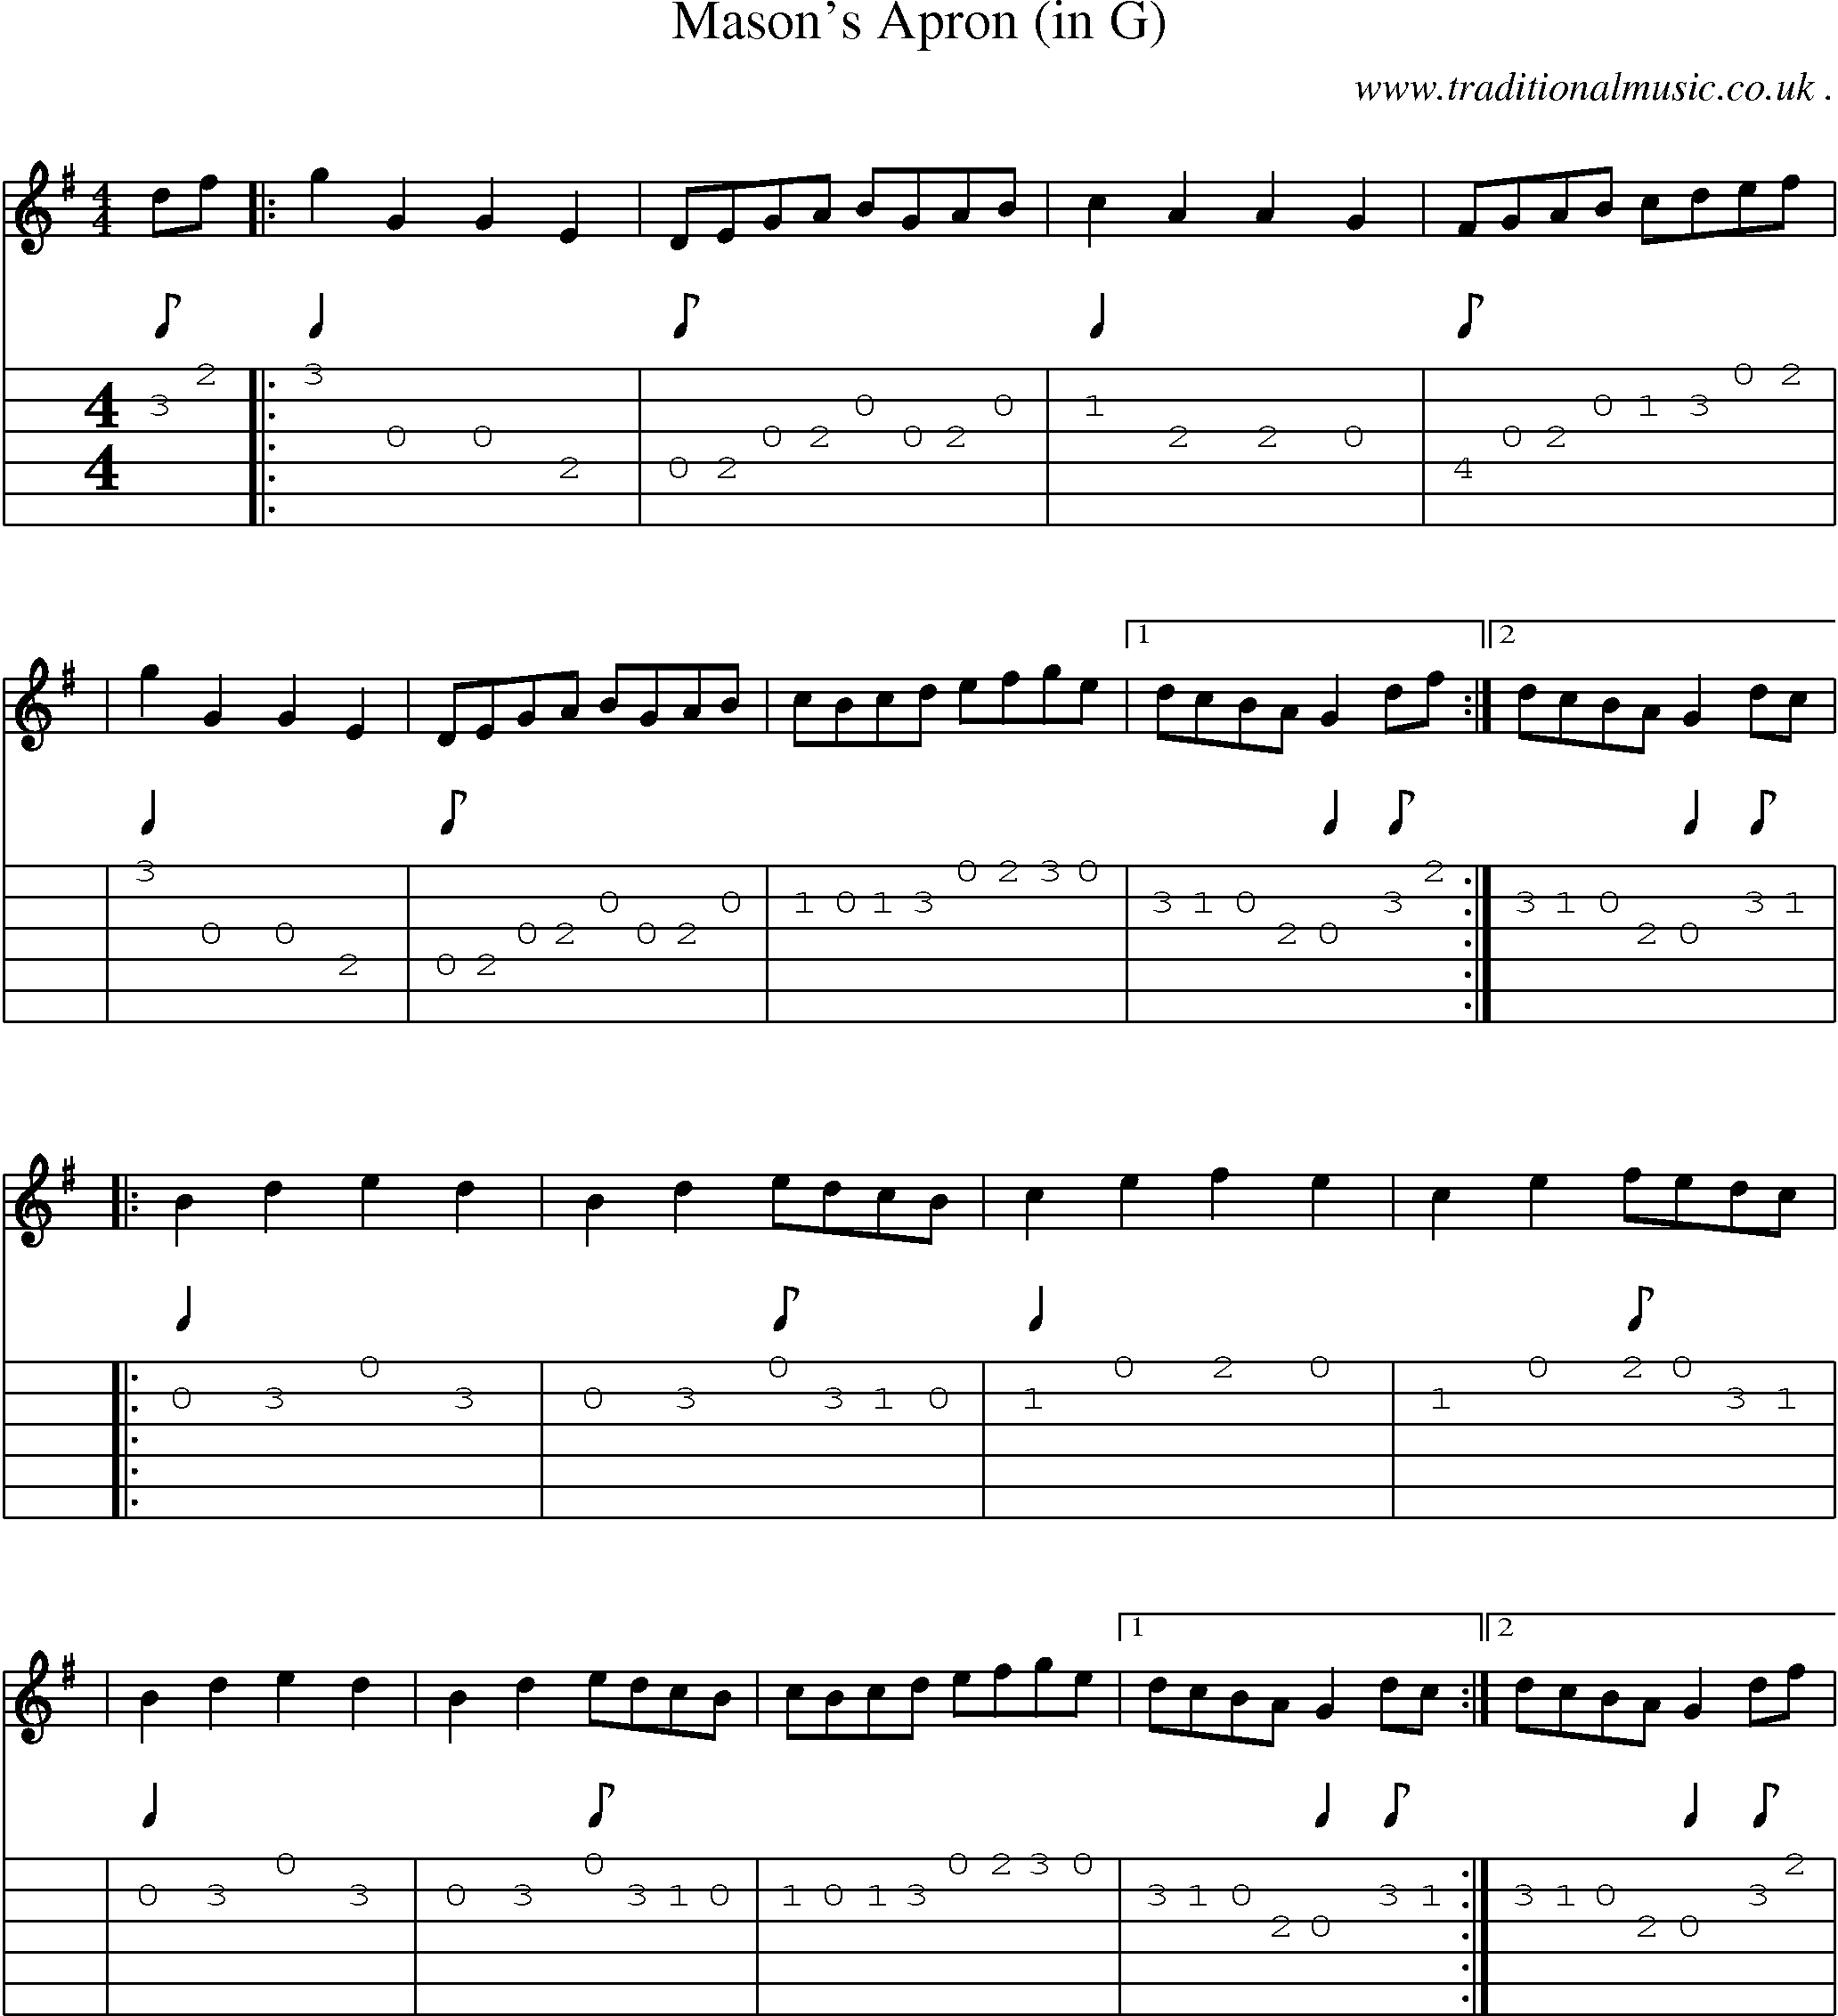 Sheet-Music and Guitar Tabs for Masons Apron (in G)